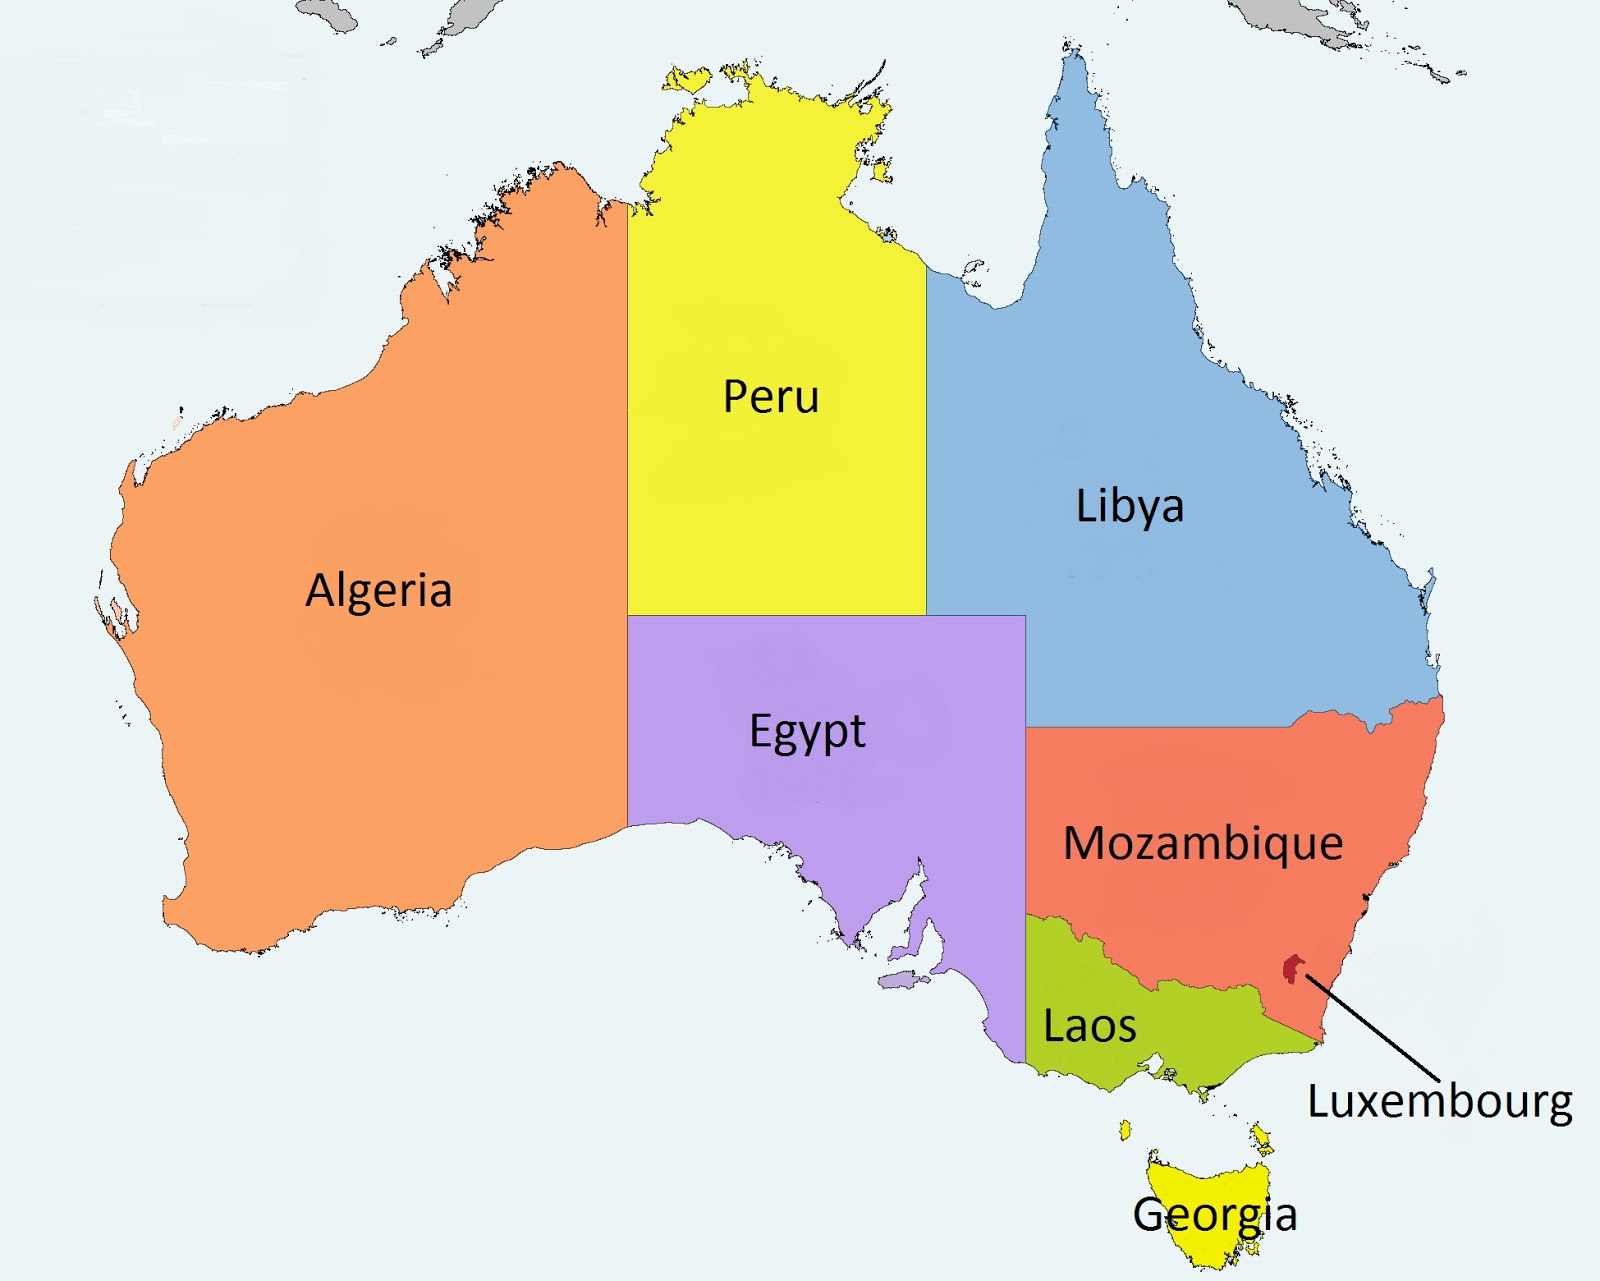 states and territories compared to countries of a similar size - Vivid Maps